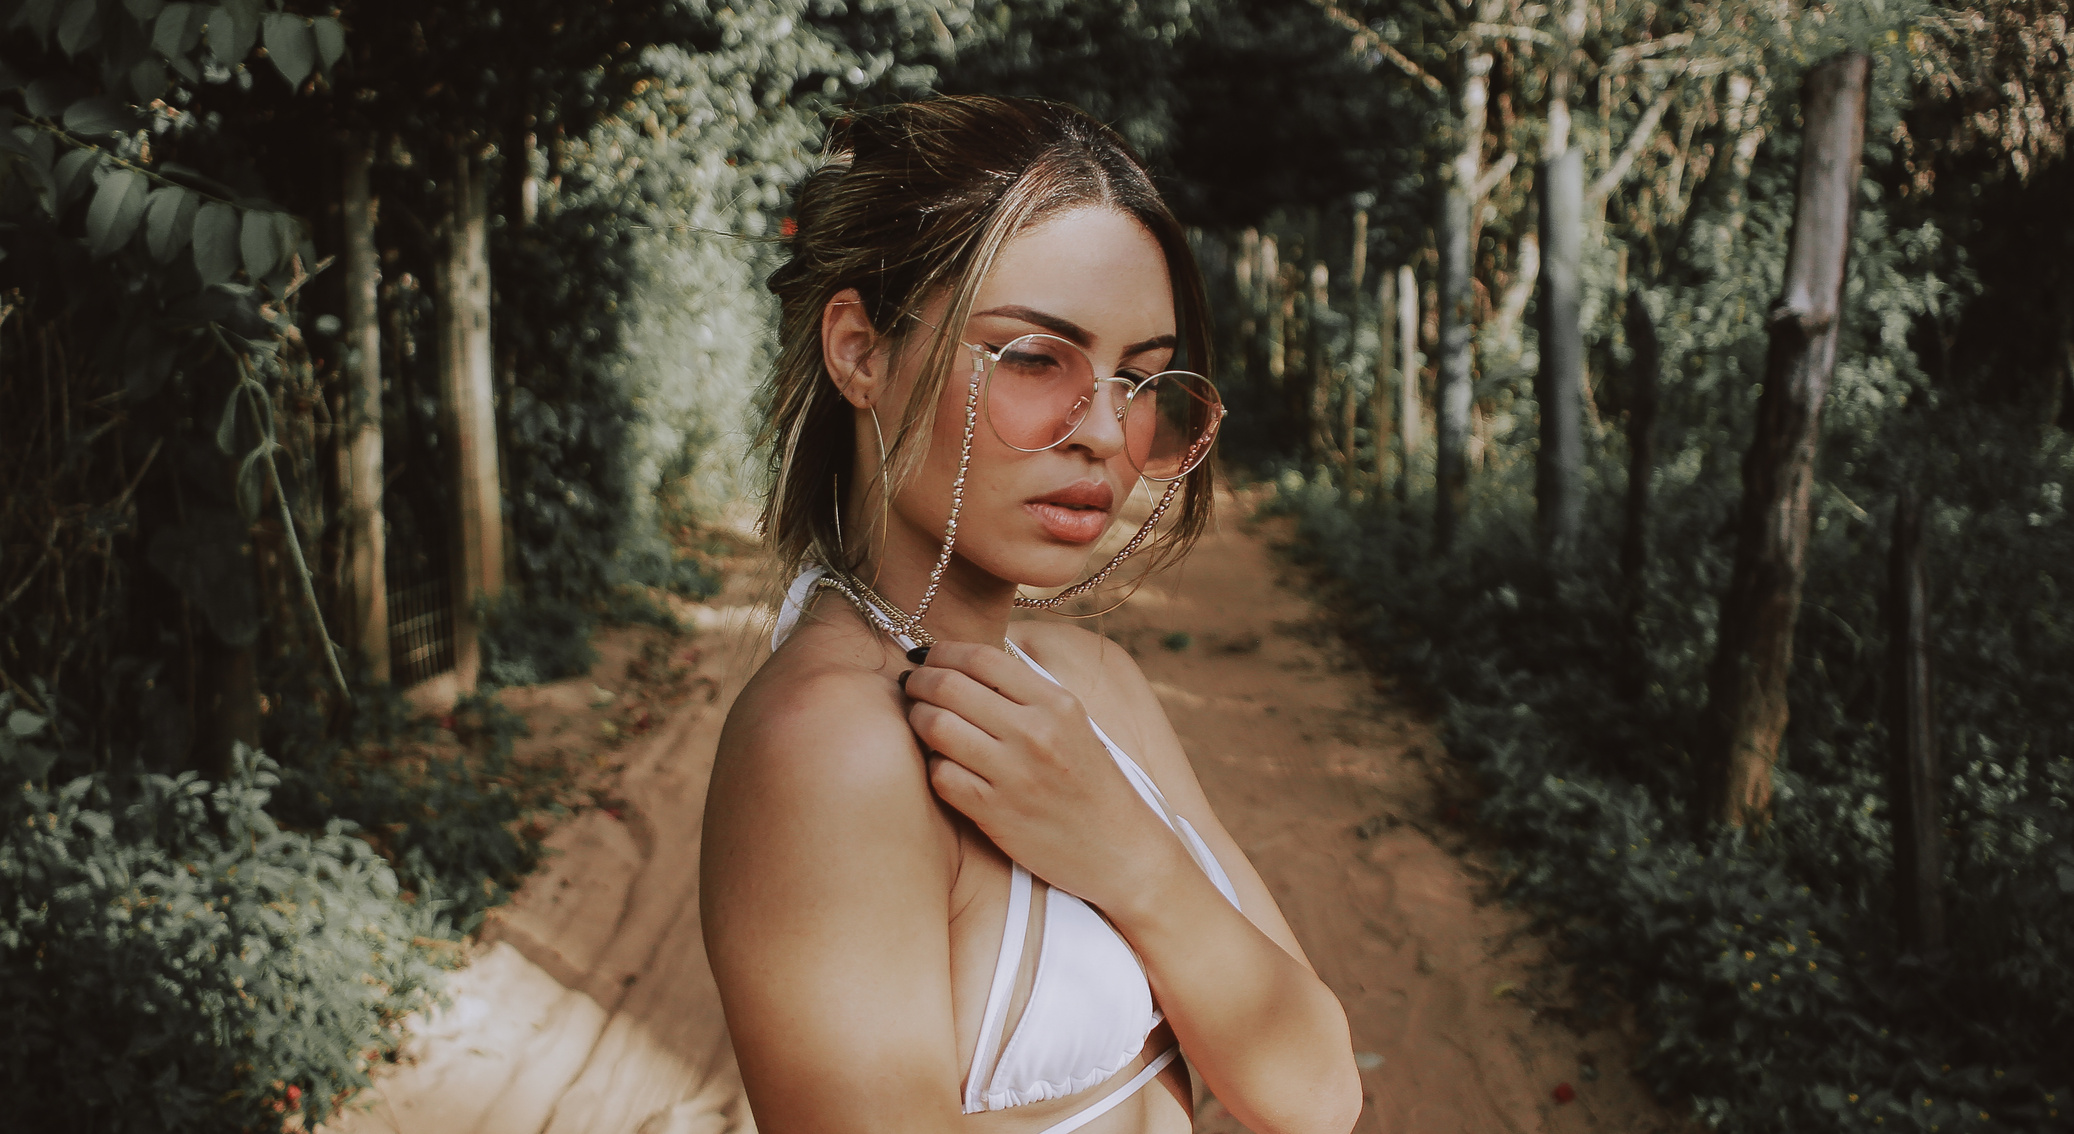 Woman Wearing White Brassiere and Gold-colored Frame Sunglasses Between Forest